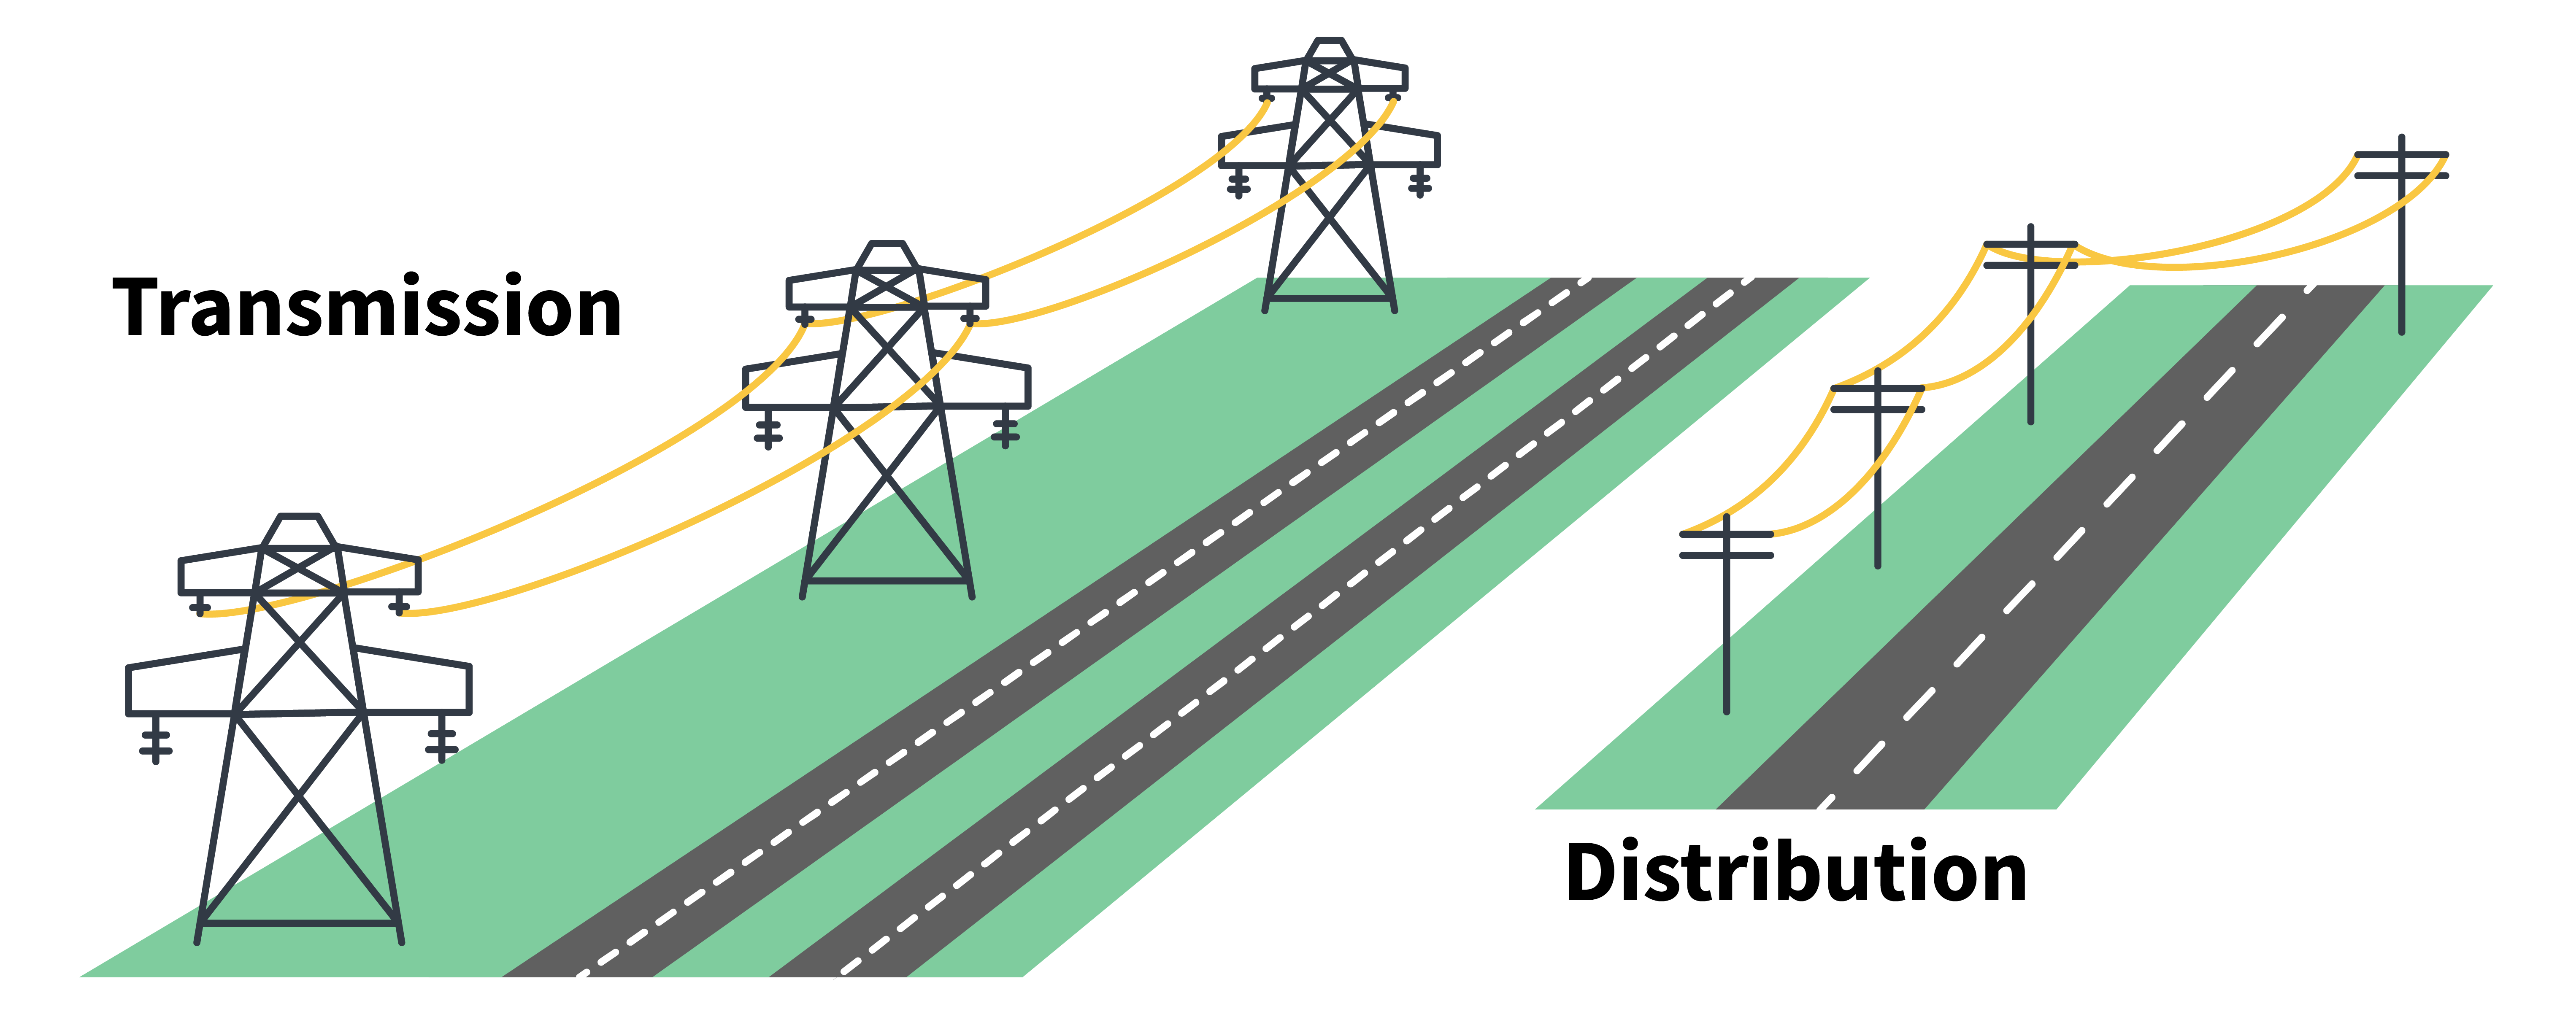 transmission lines and distribution poles